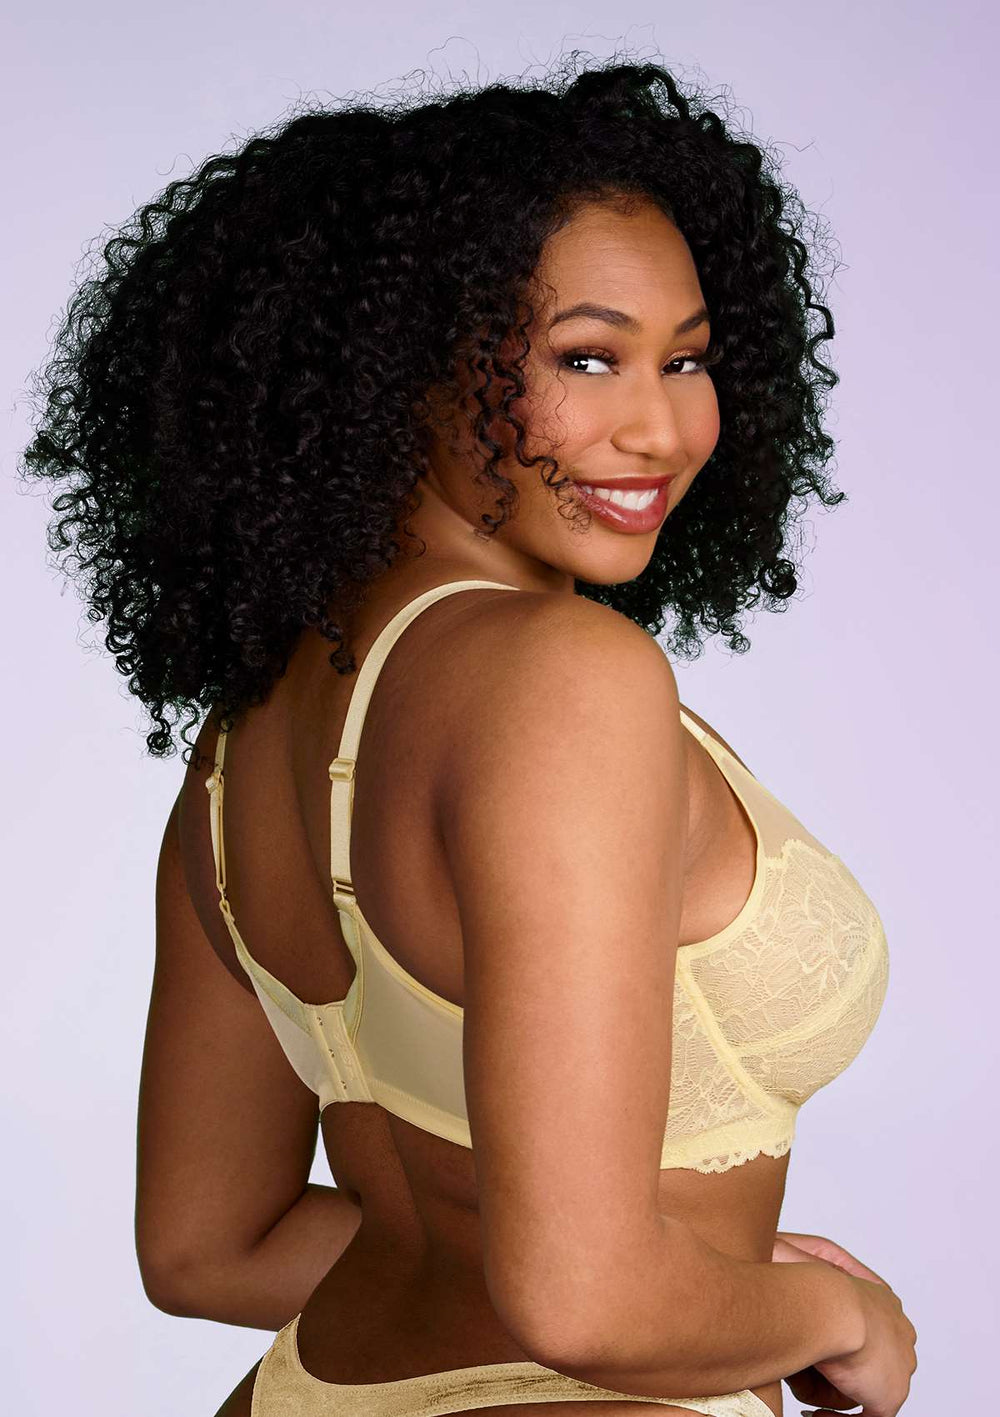 Is wearing an underwire bra bad for you? - Quora